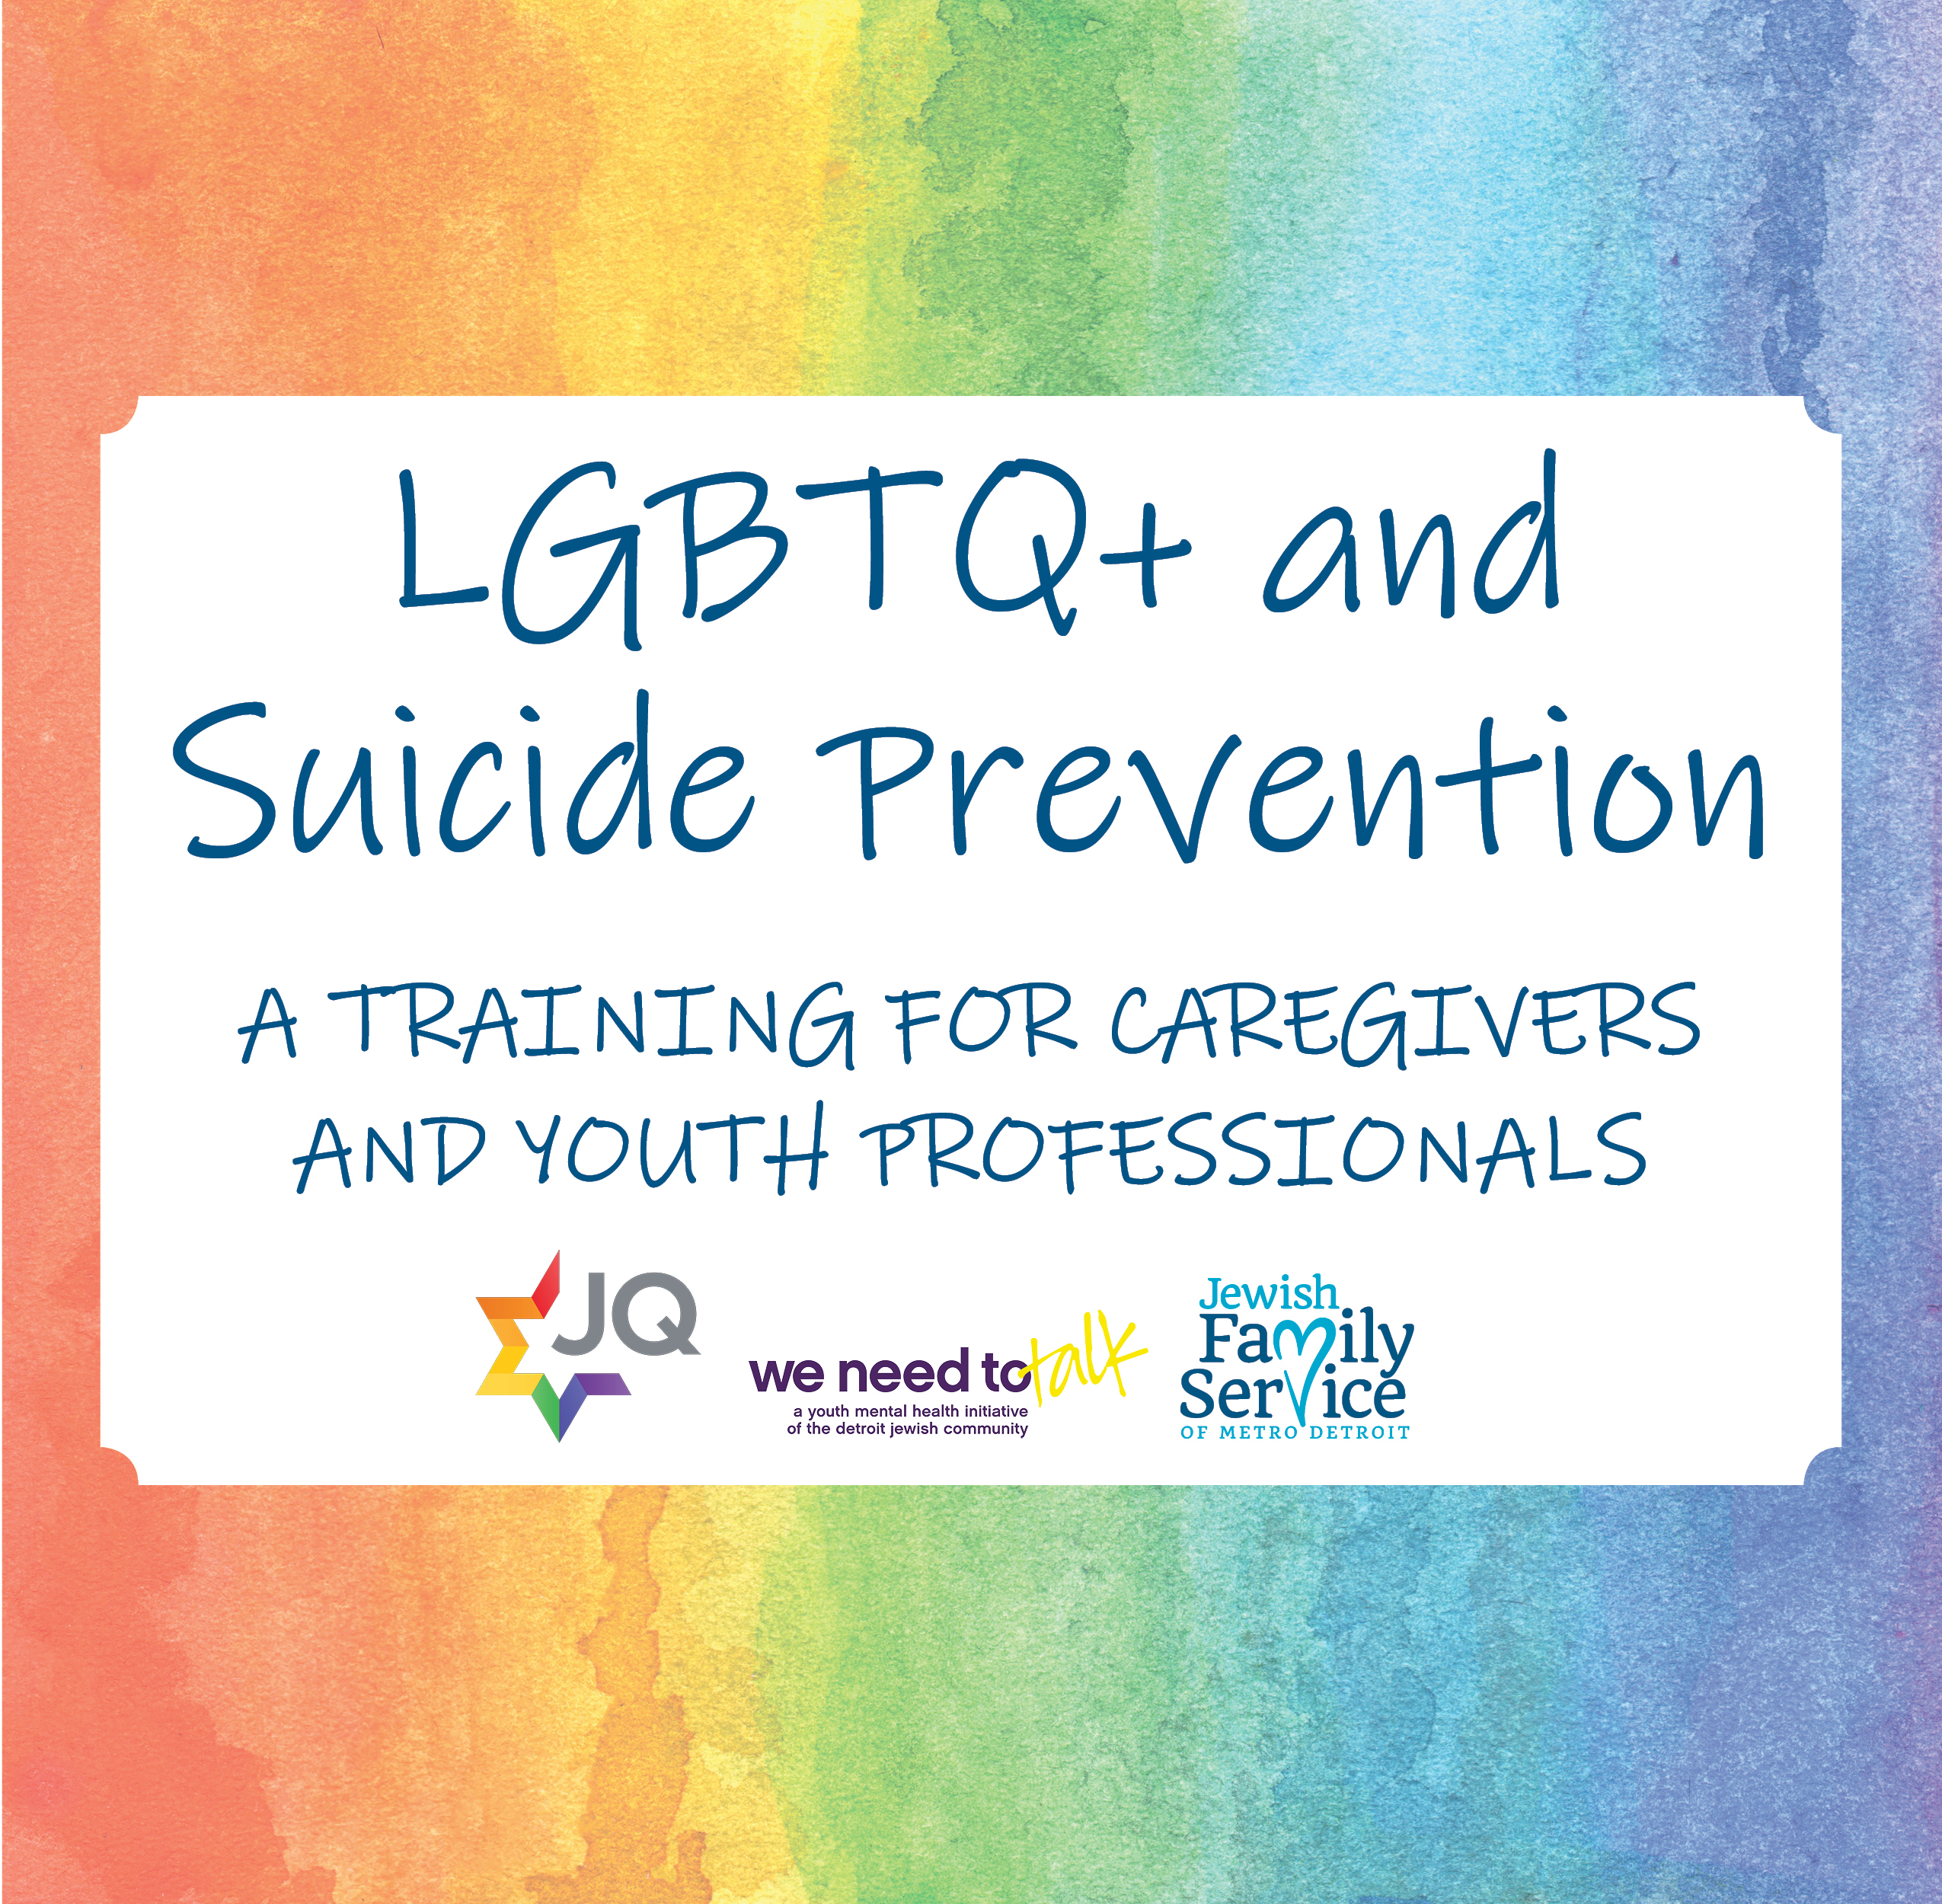 LGBTQ+ and Suicide Prevention: A Training for Caregivers and Youth Professionals